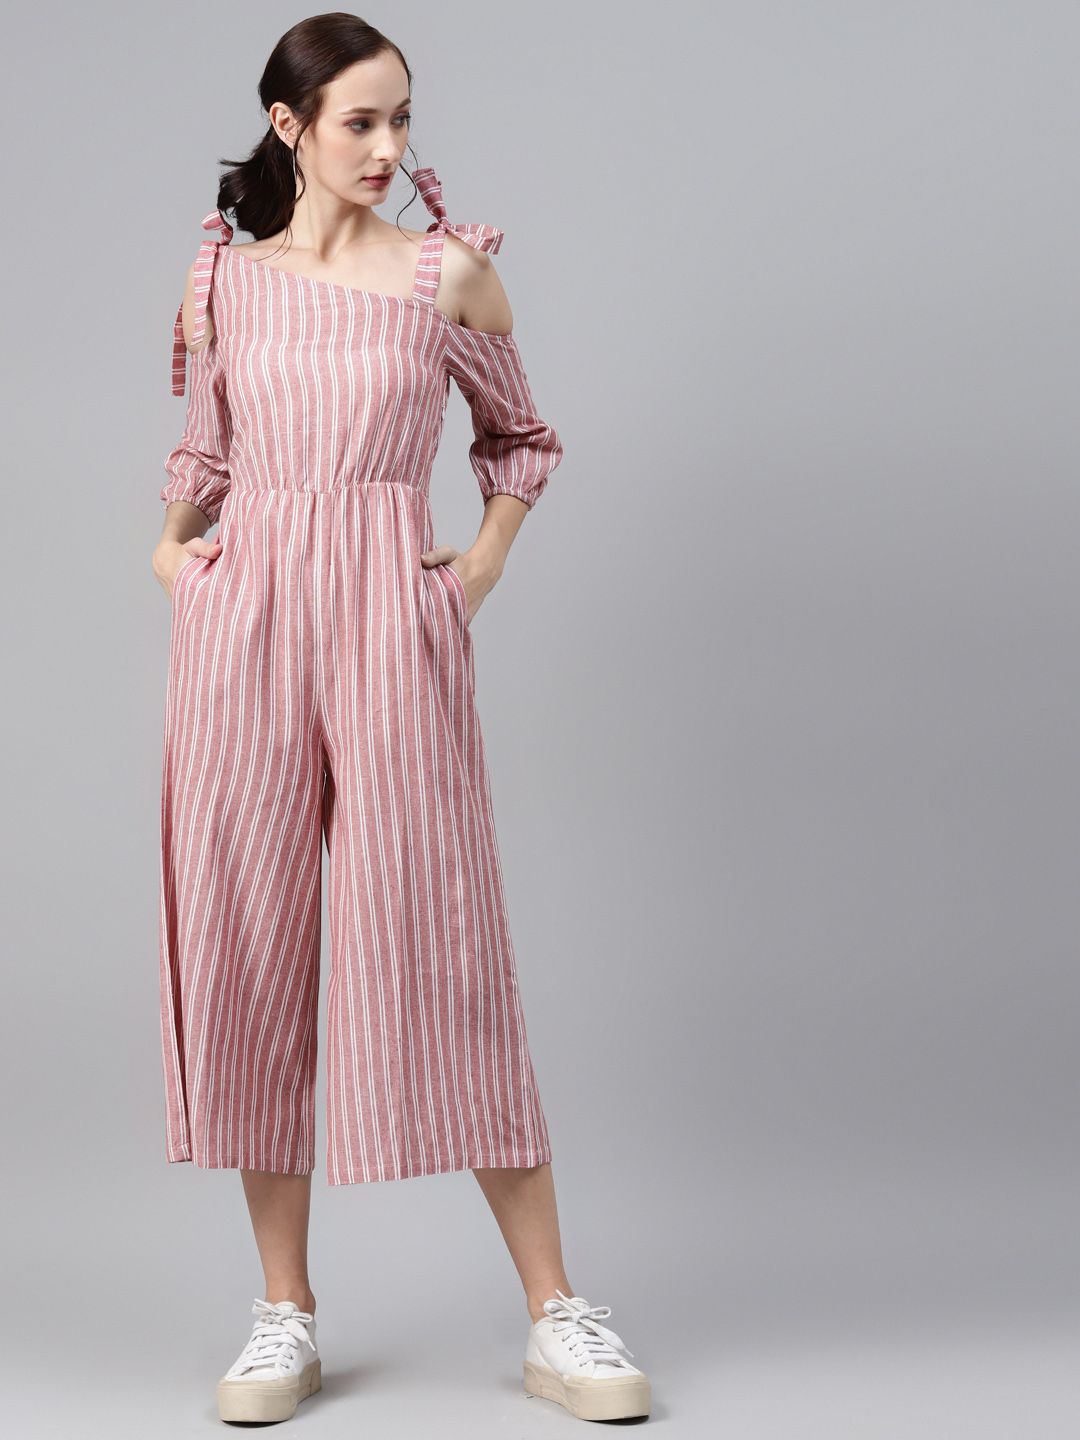 Cottinfab Red & White Striped Cotton Culotte Jumpsuit Price in India